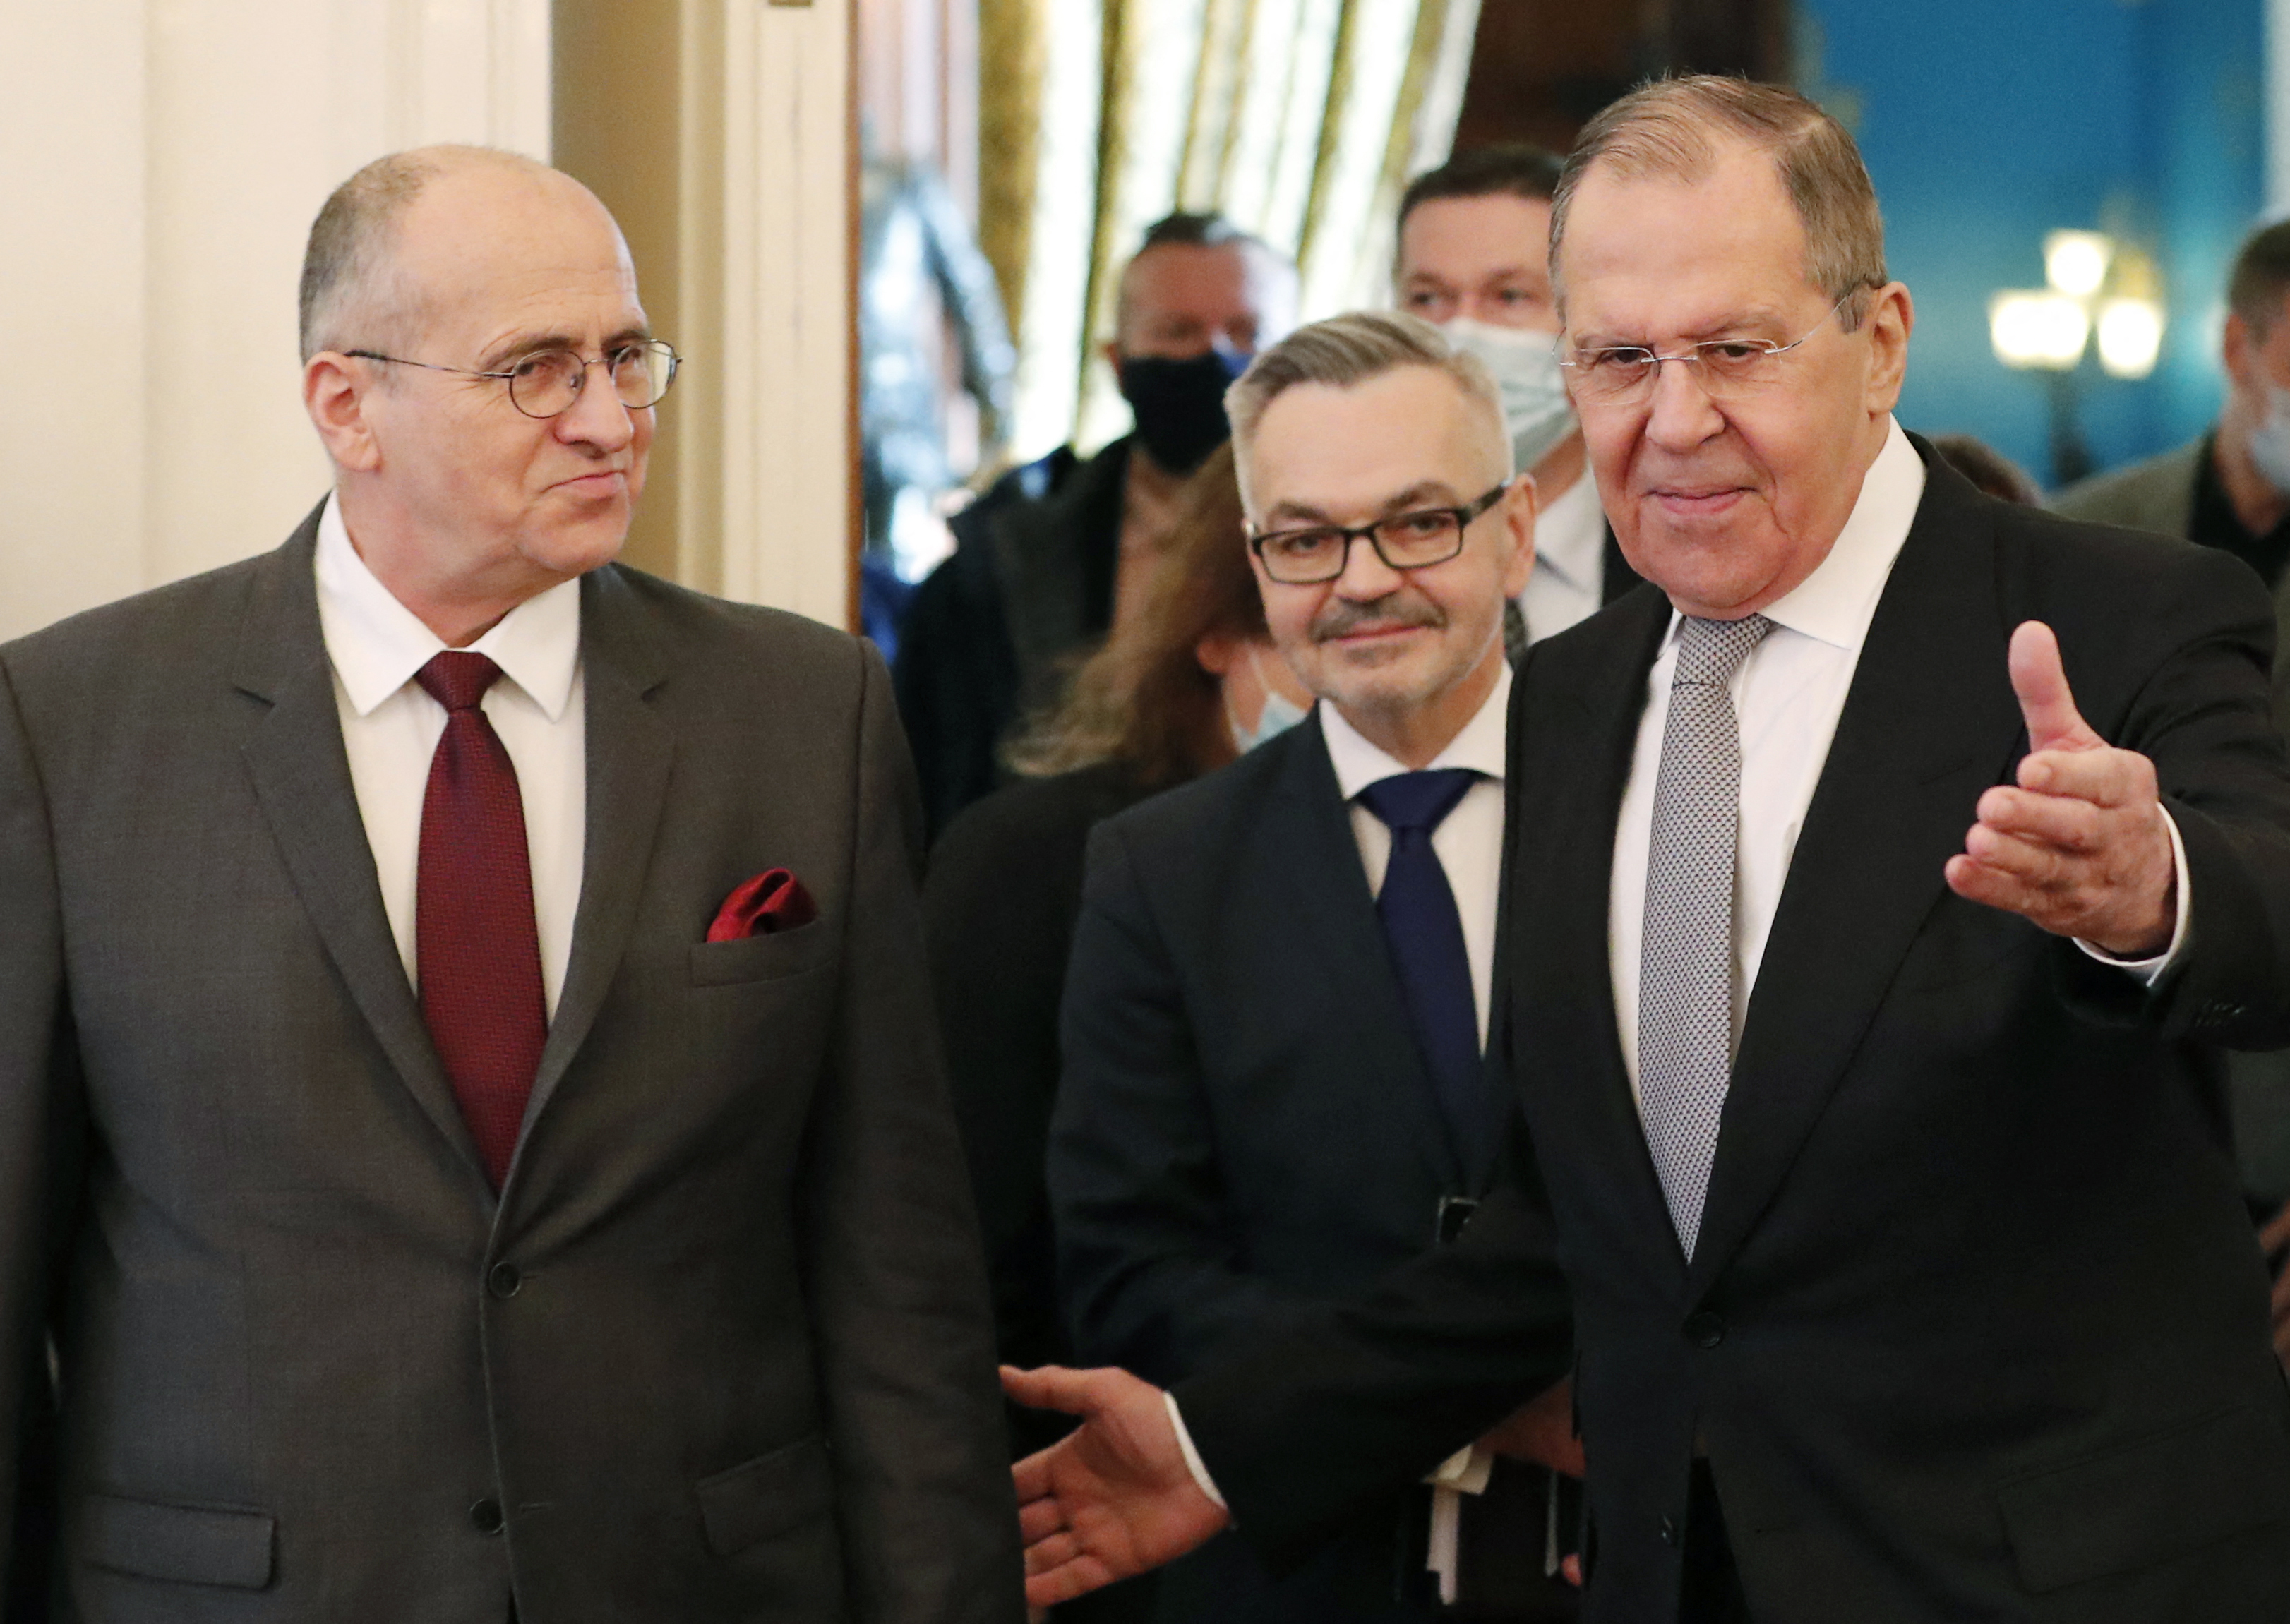 Russian Foreign Minister Sergei Lavrov, right, welcomes OSCE Chairman and Poland's Foreign Minister Zbigniew Rau during a meeting in Moscow on February 15.